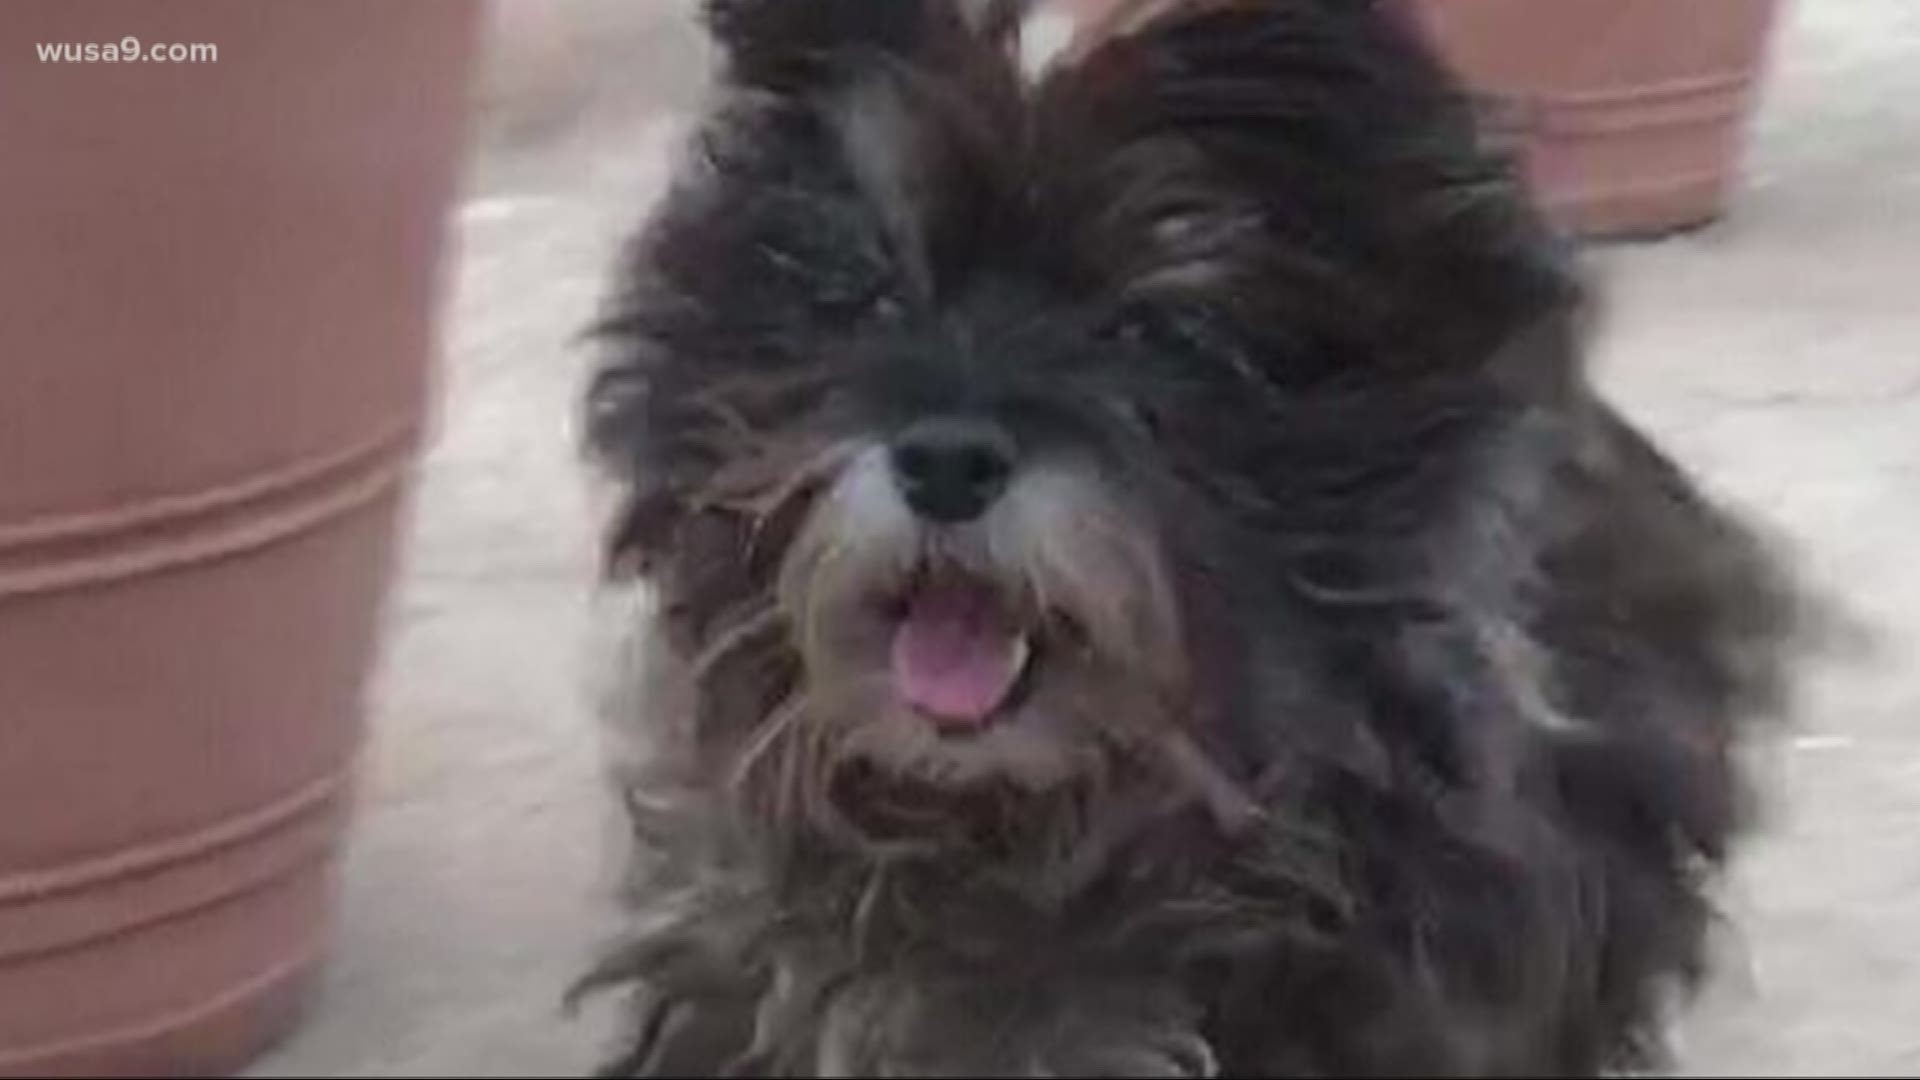 The search is on for a small dog who fell into a storm drain.